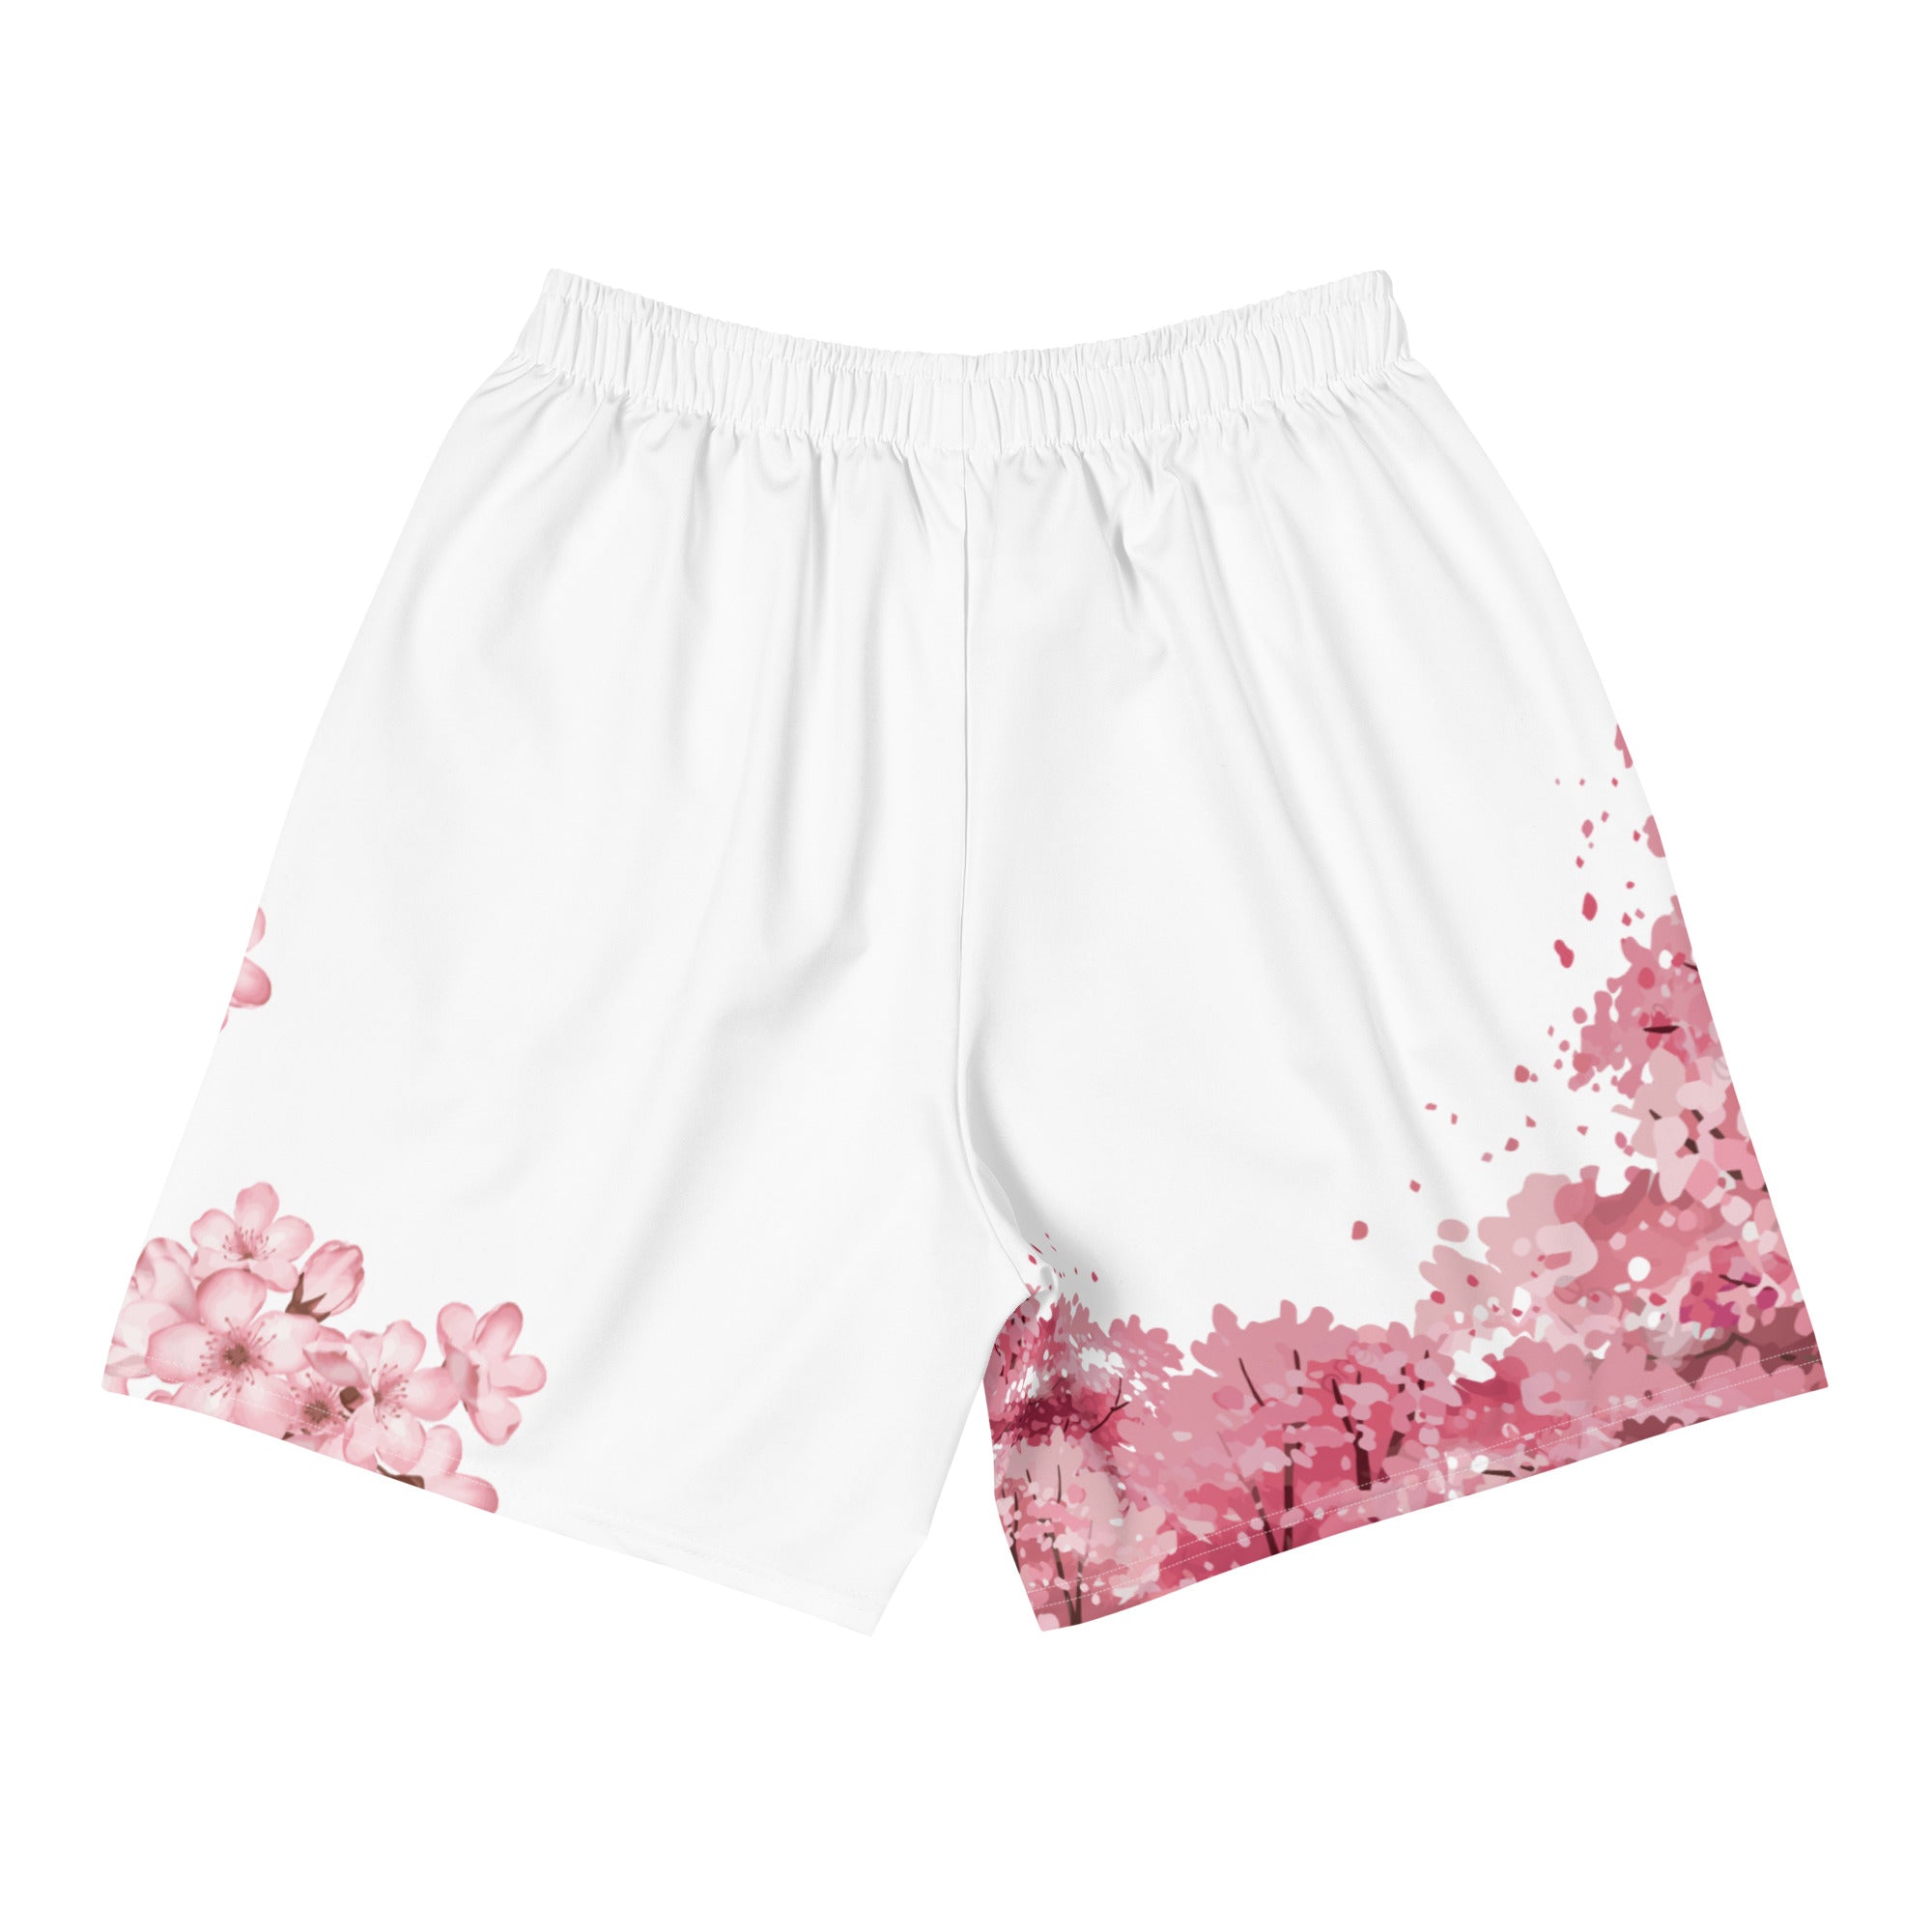 Cherry Blossom Men's Recycled Athletic Shorts